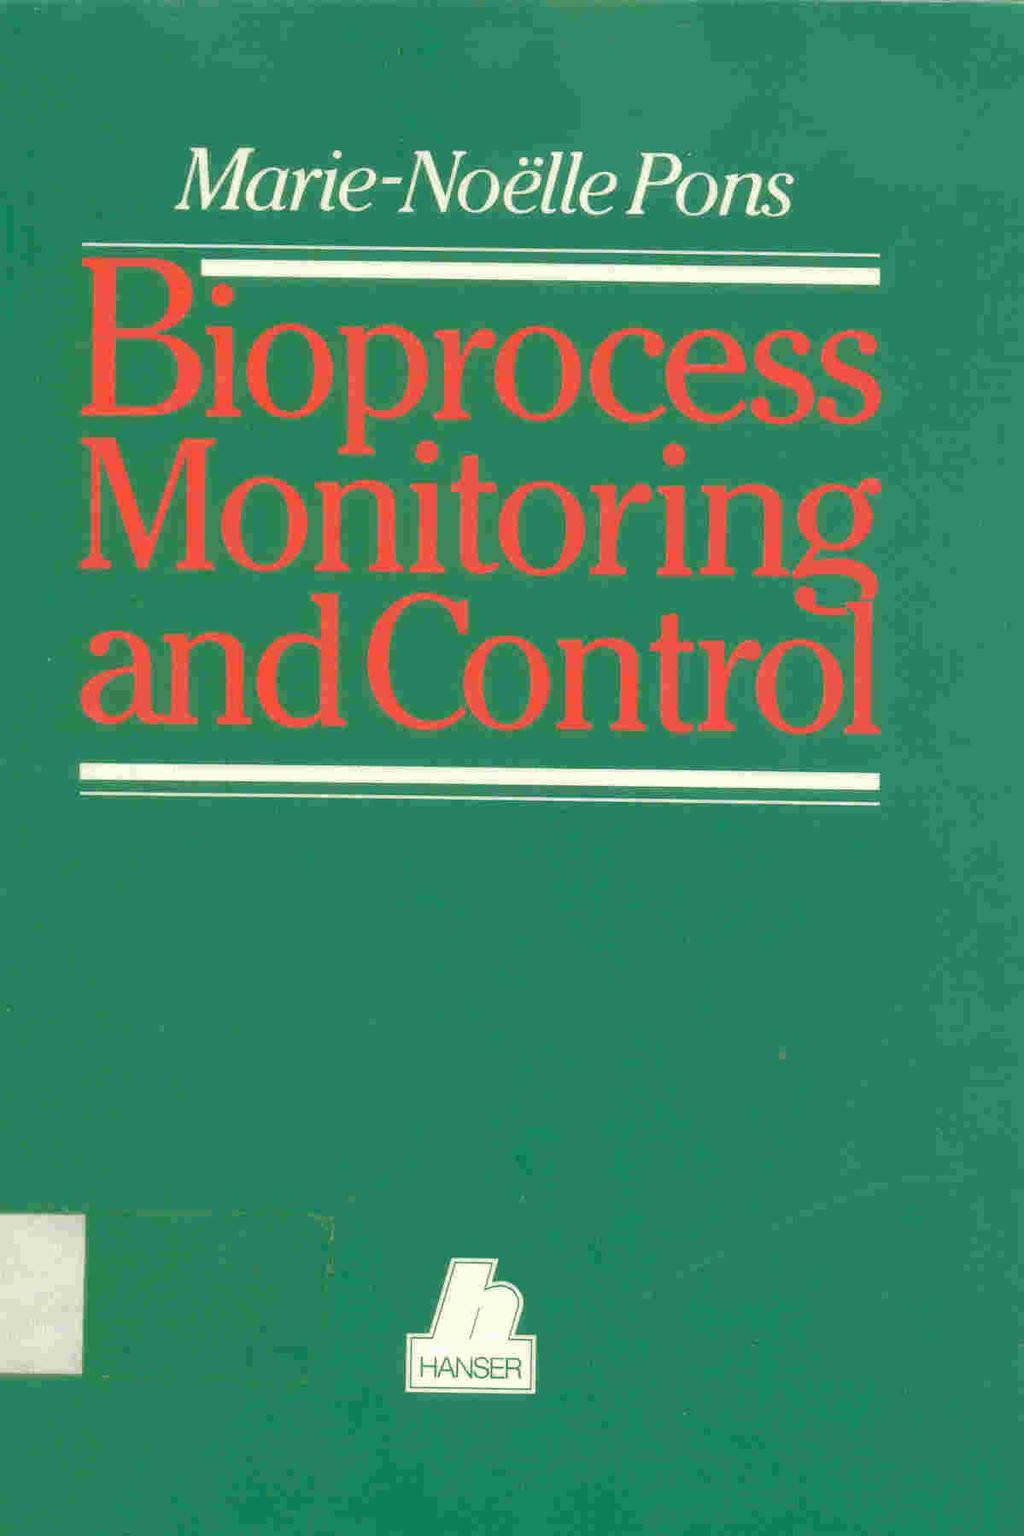 Leitura Complementar VII Pons, M-N. Bioprocess Monitoring and Control.